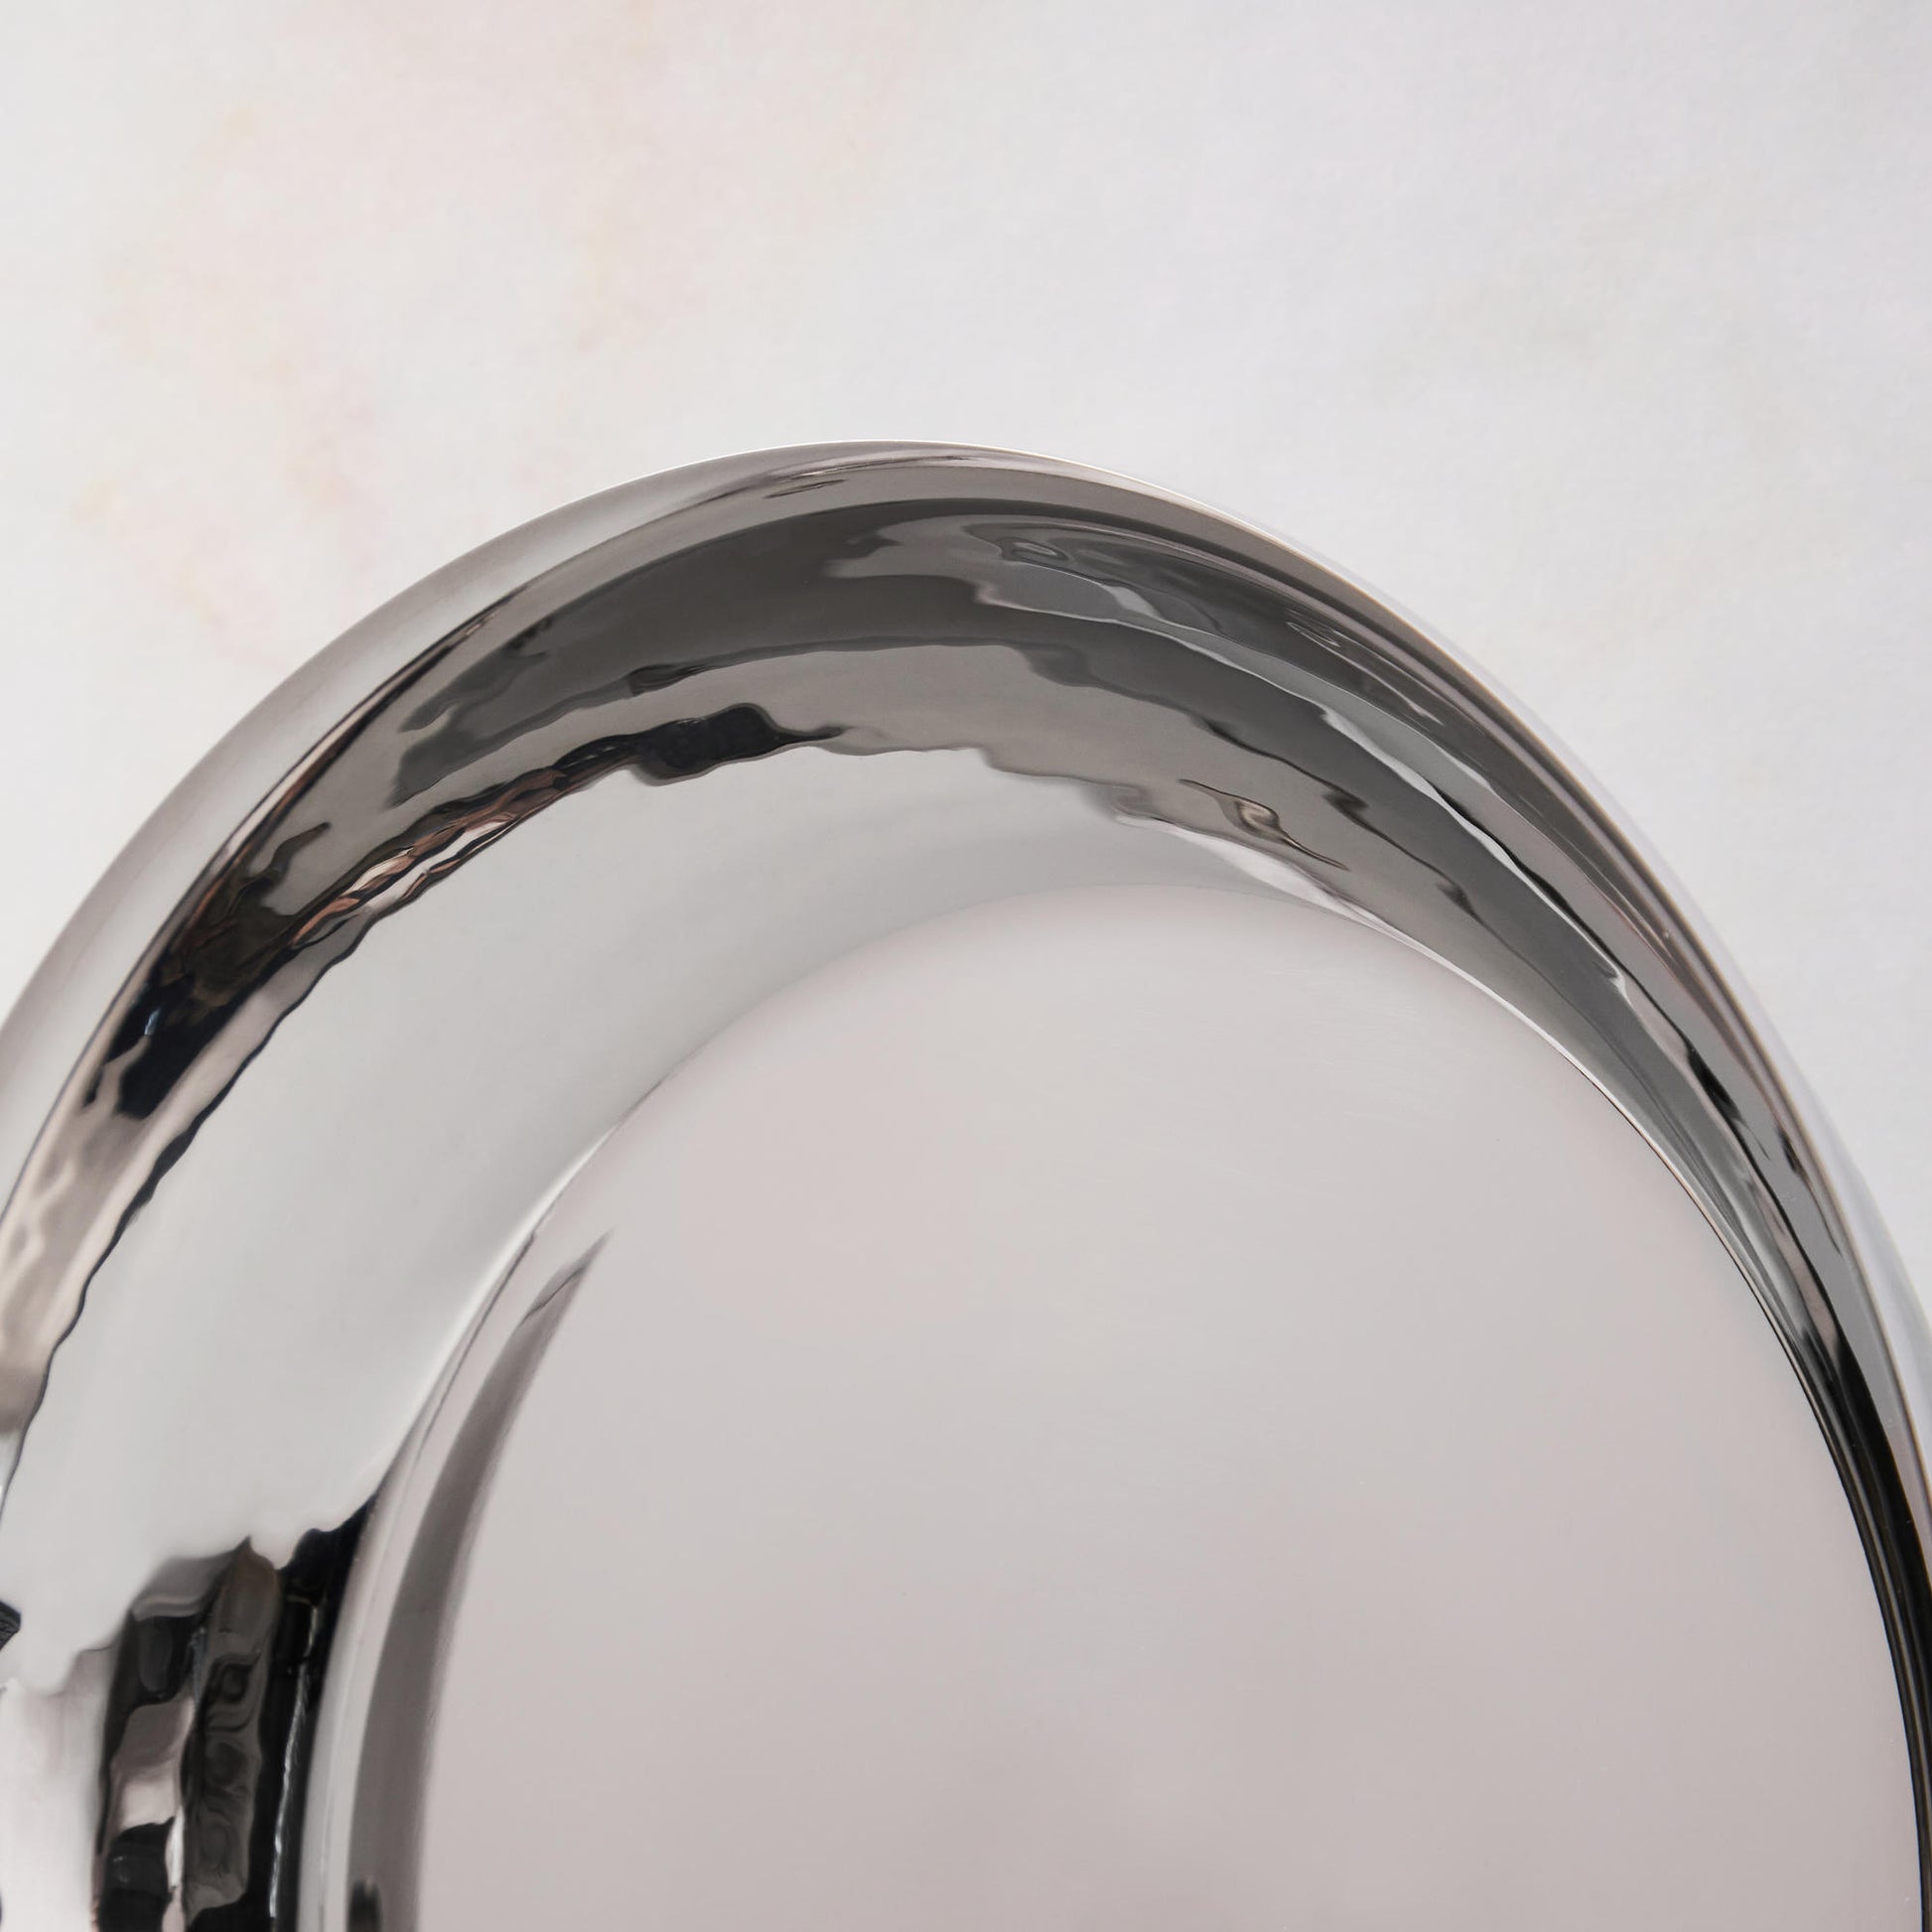 Mirror polished and hammered clad stainless steel saucepan from Ruffoni